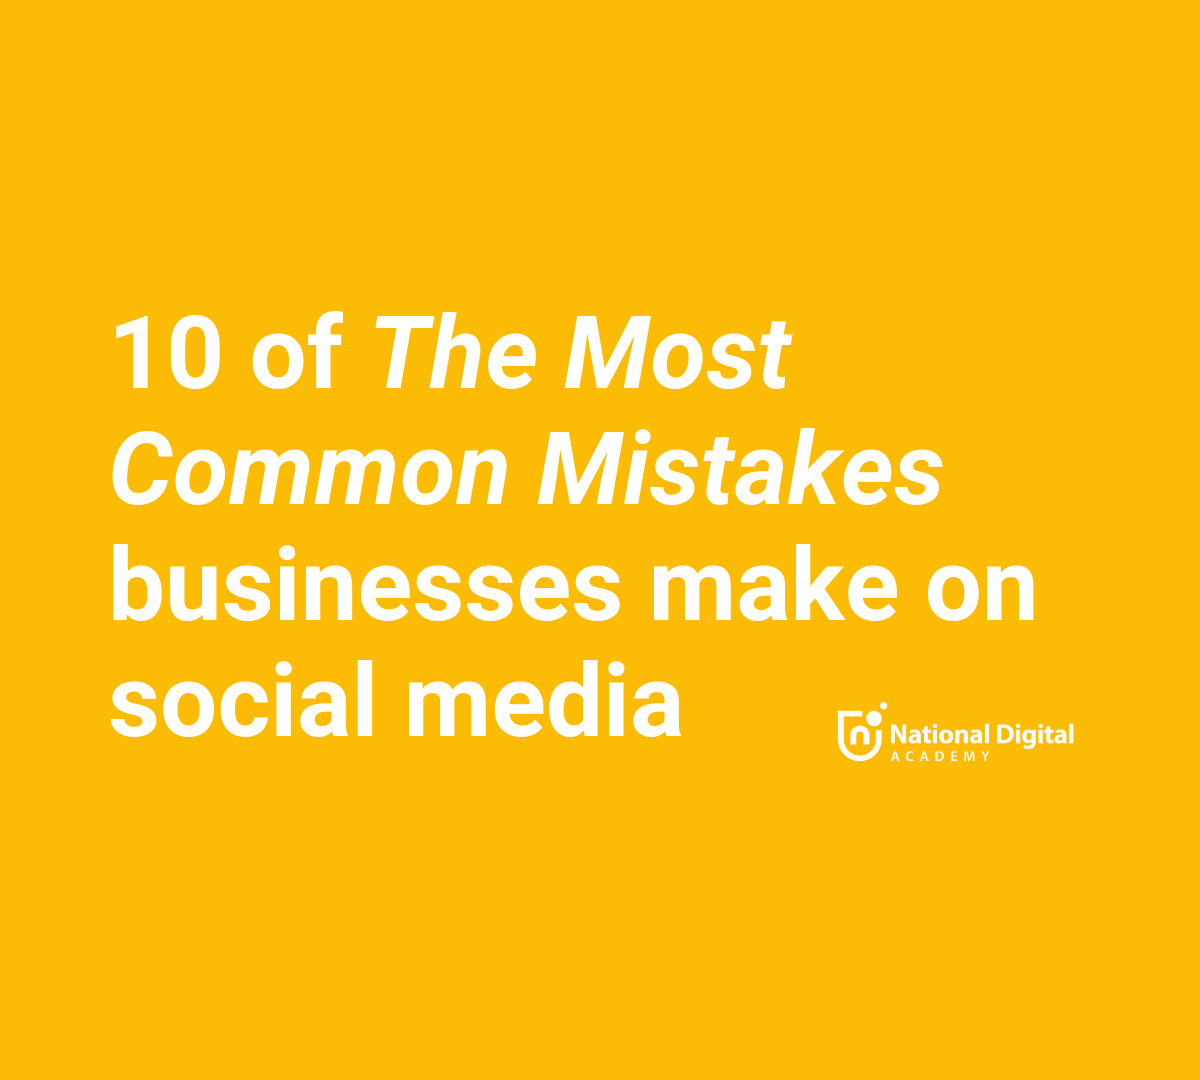 what are the most common social media mistakes